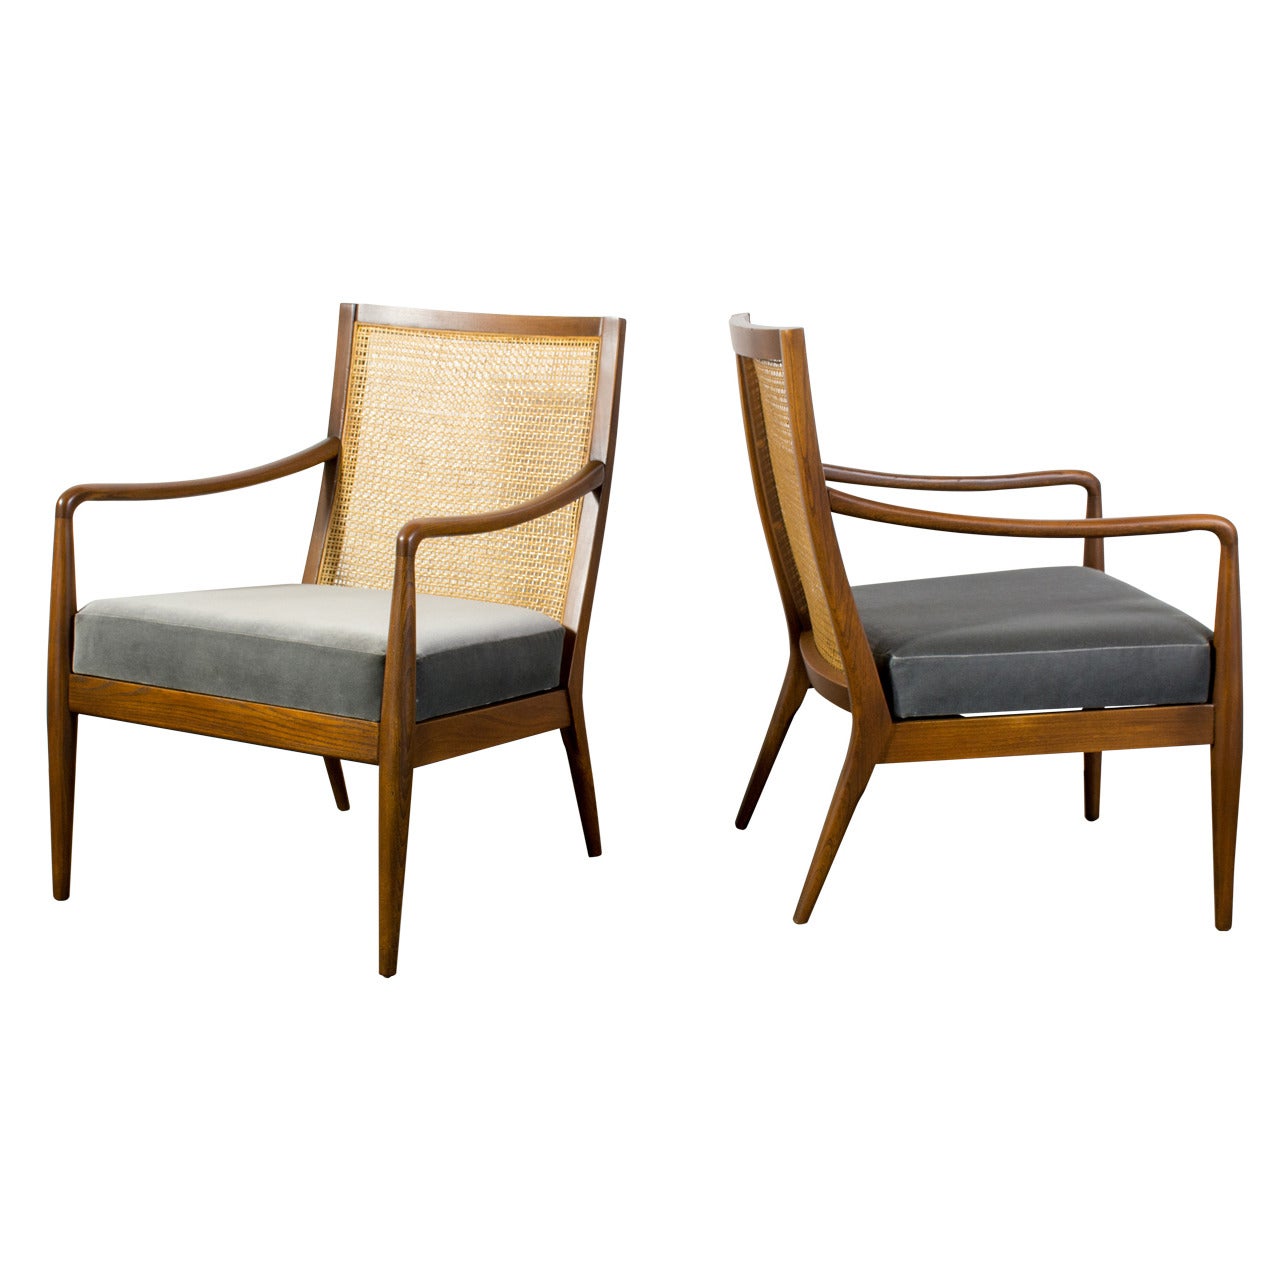 Pair of Vintage Mid-Century Chairs by Richardson Nemschoff